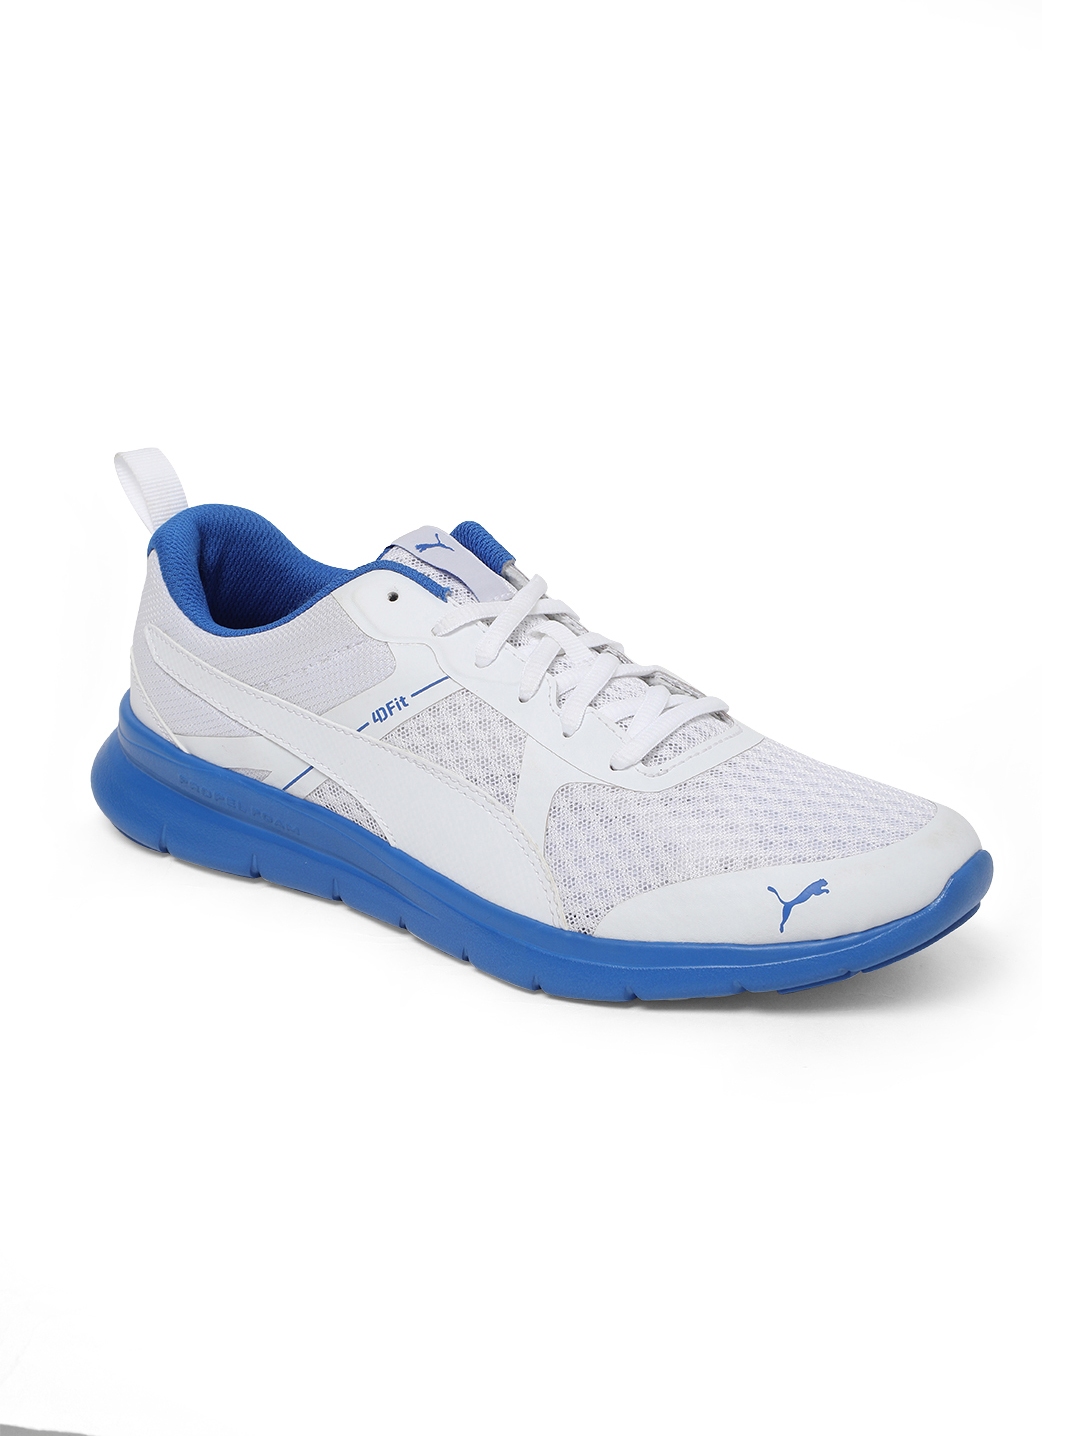 Buy Puma Unisex White Sneakers - Casual Shoes for Unisex 6821423 | Myntra